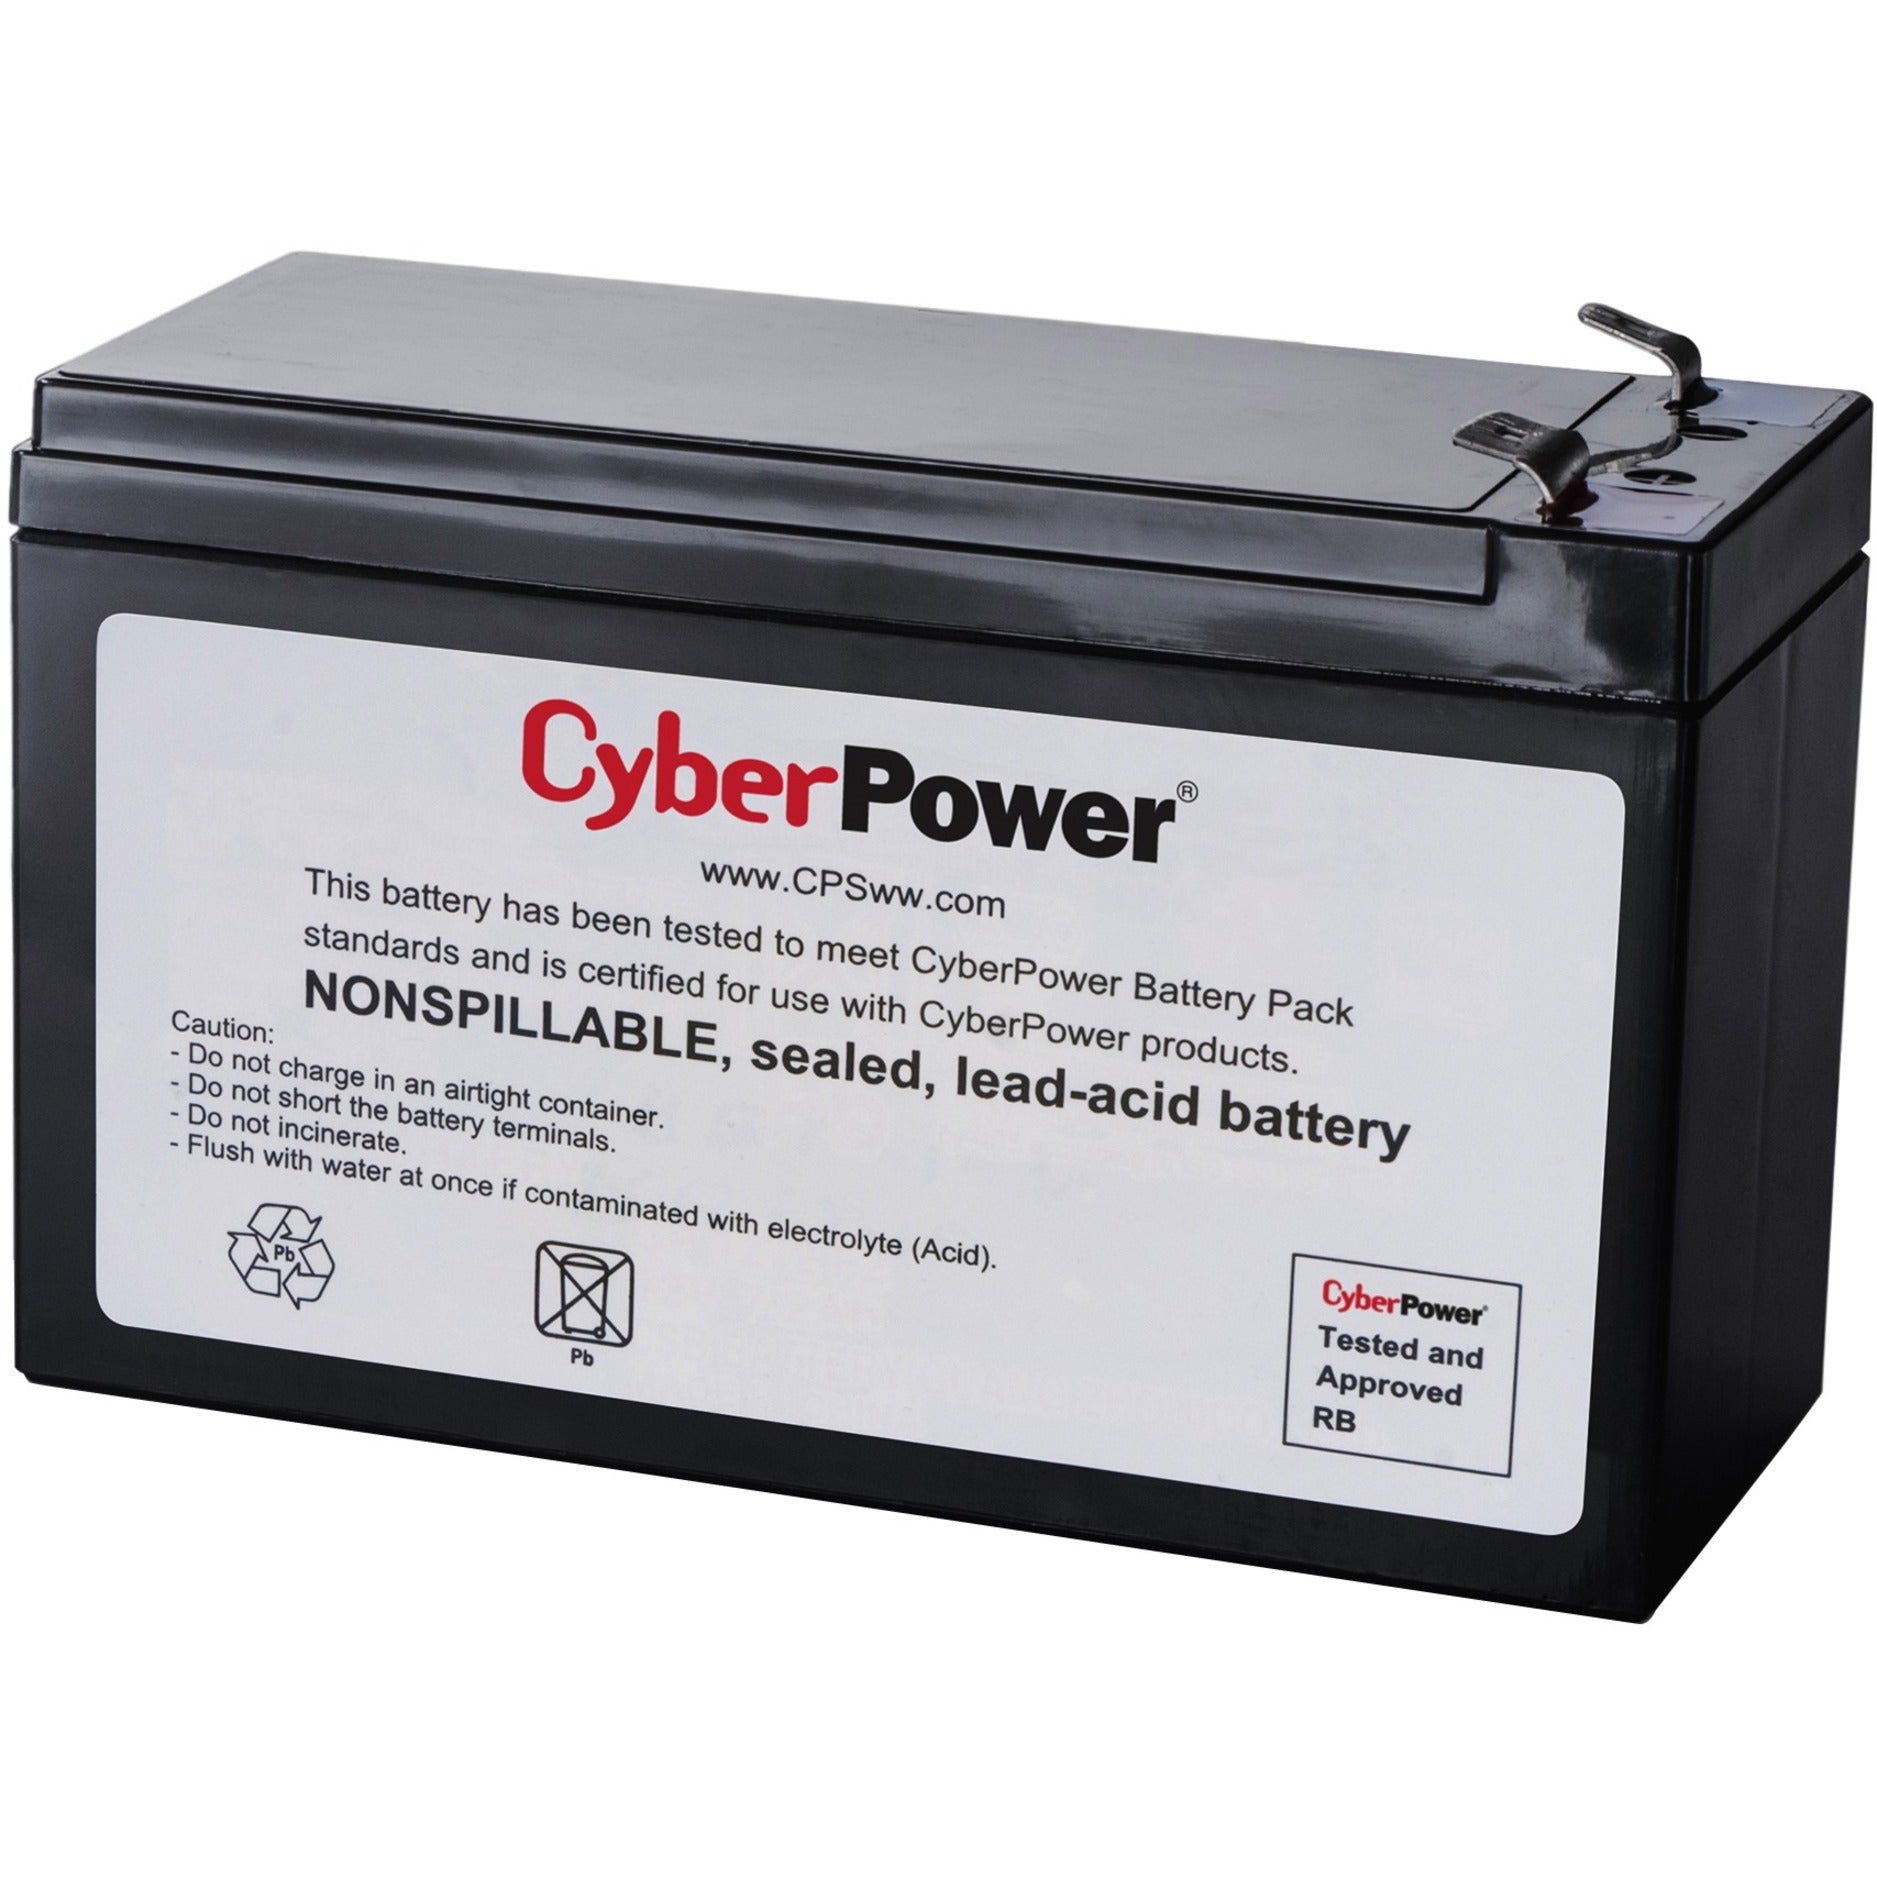 CyberPower RB1290 UPS Replacement Battery Cartridge, 18 Month Warranty, 12V DC, 9000mAh